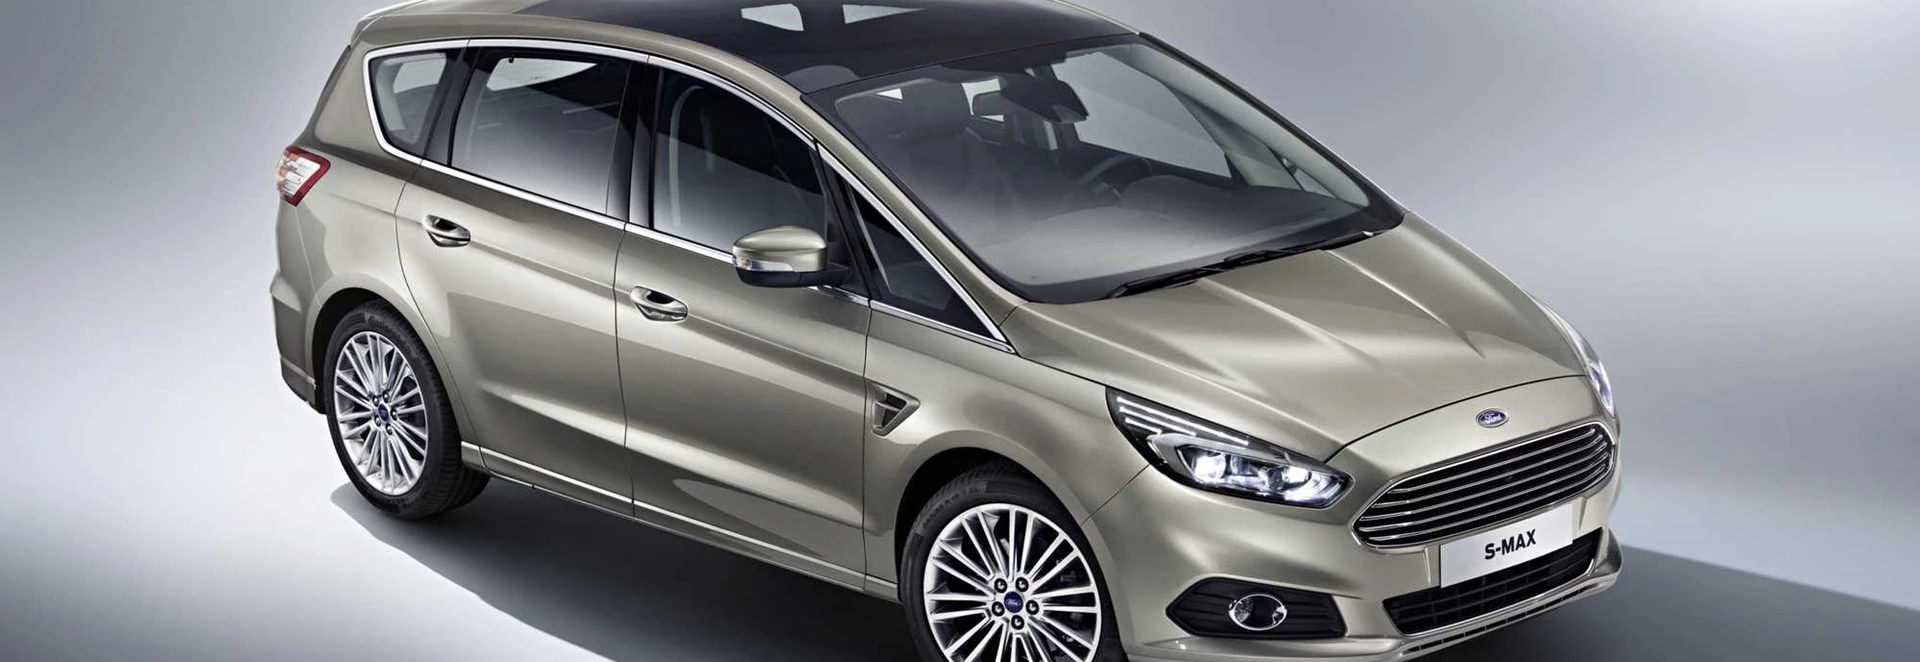 2015 Ford S-MAX engine and tech details confirmed 